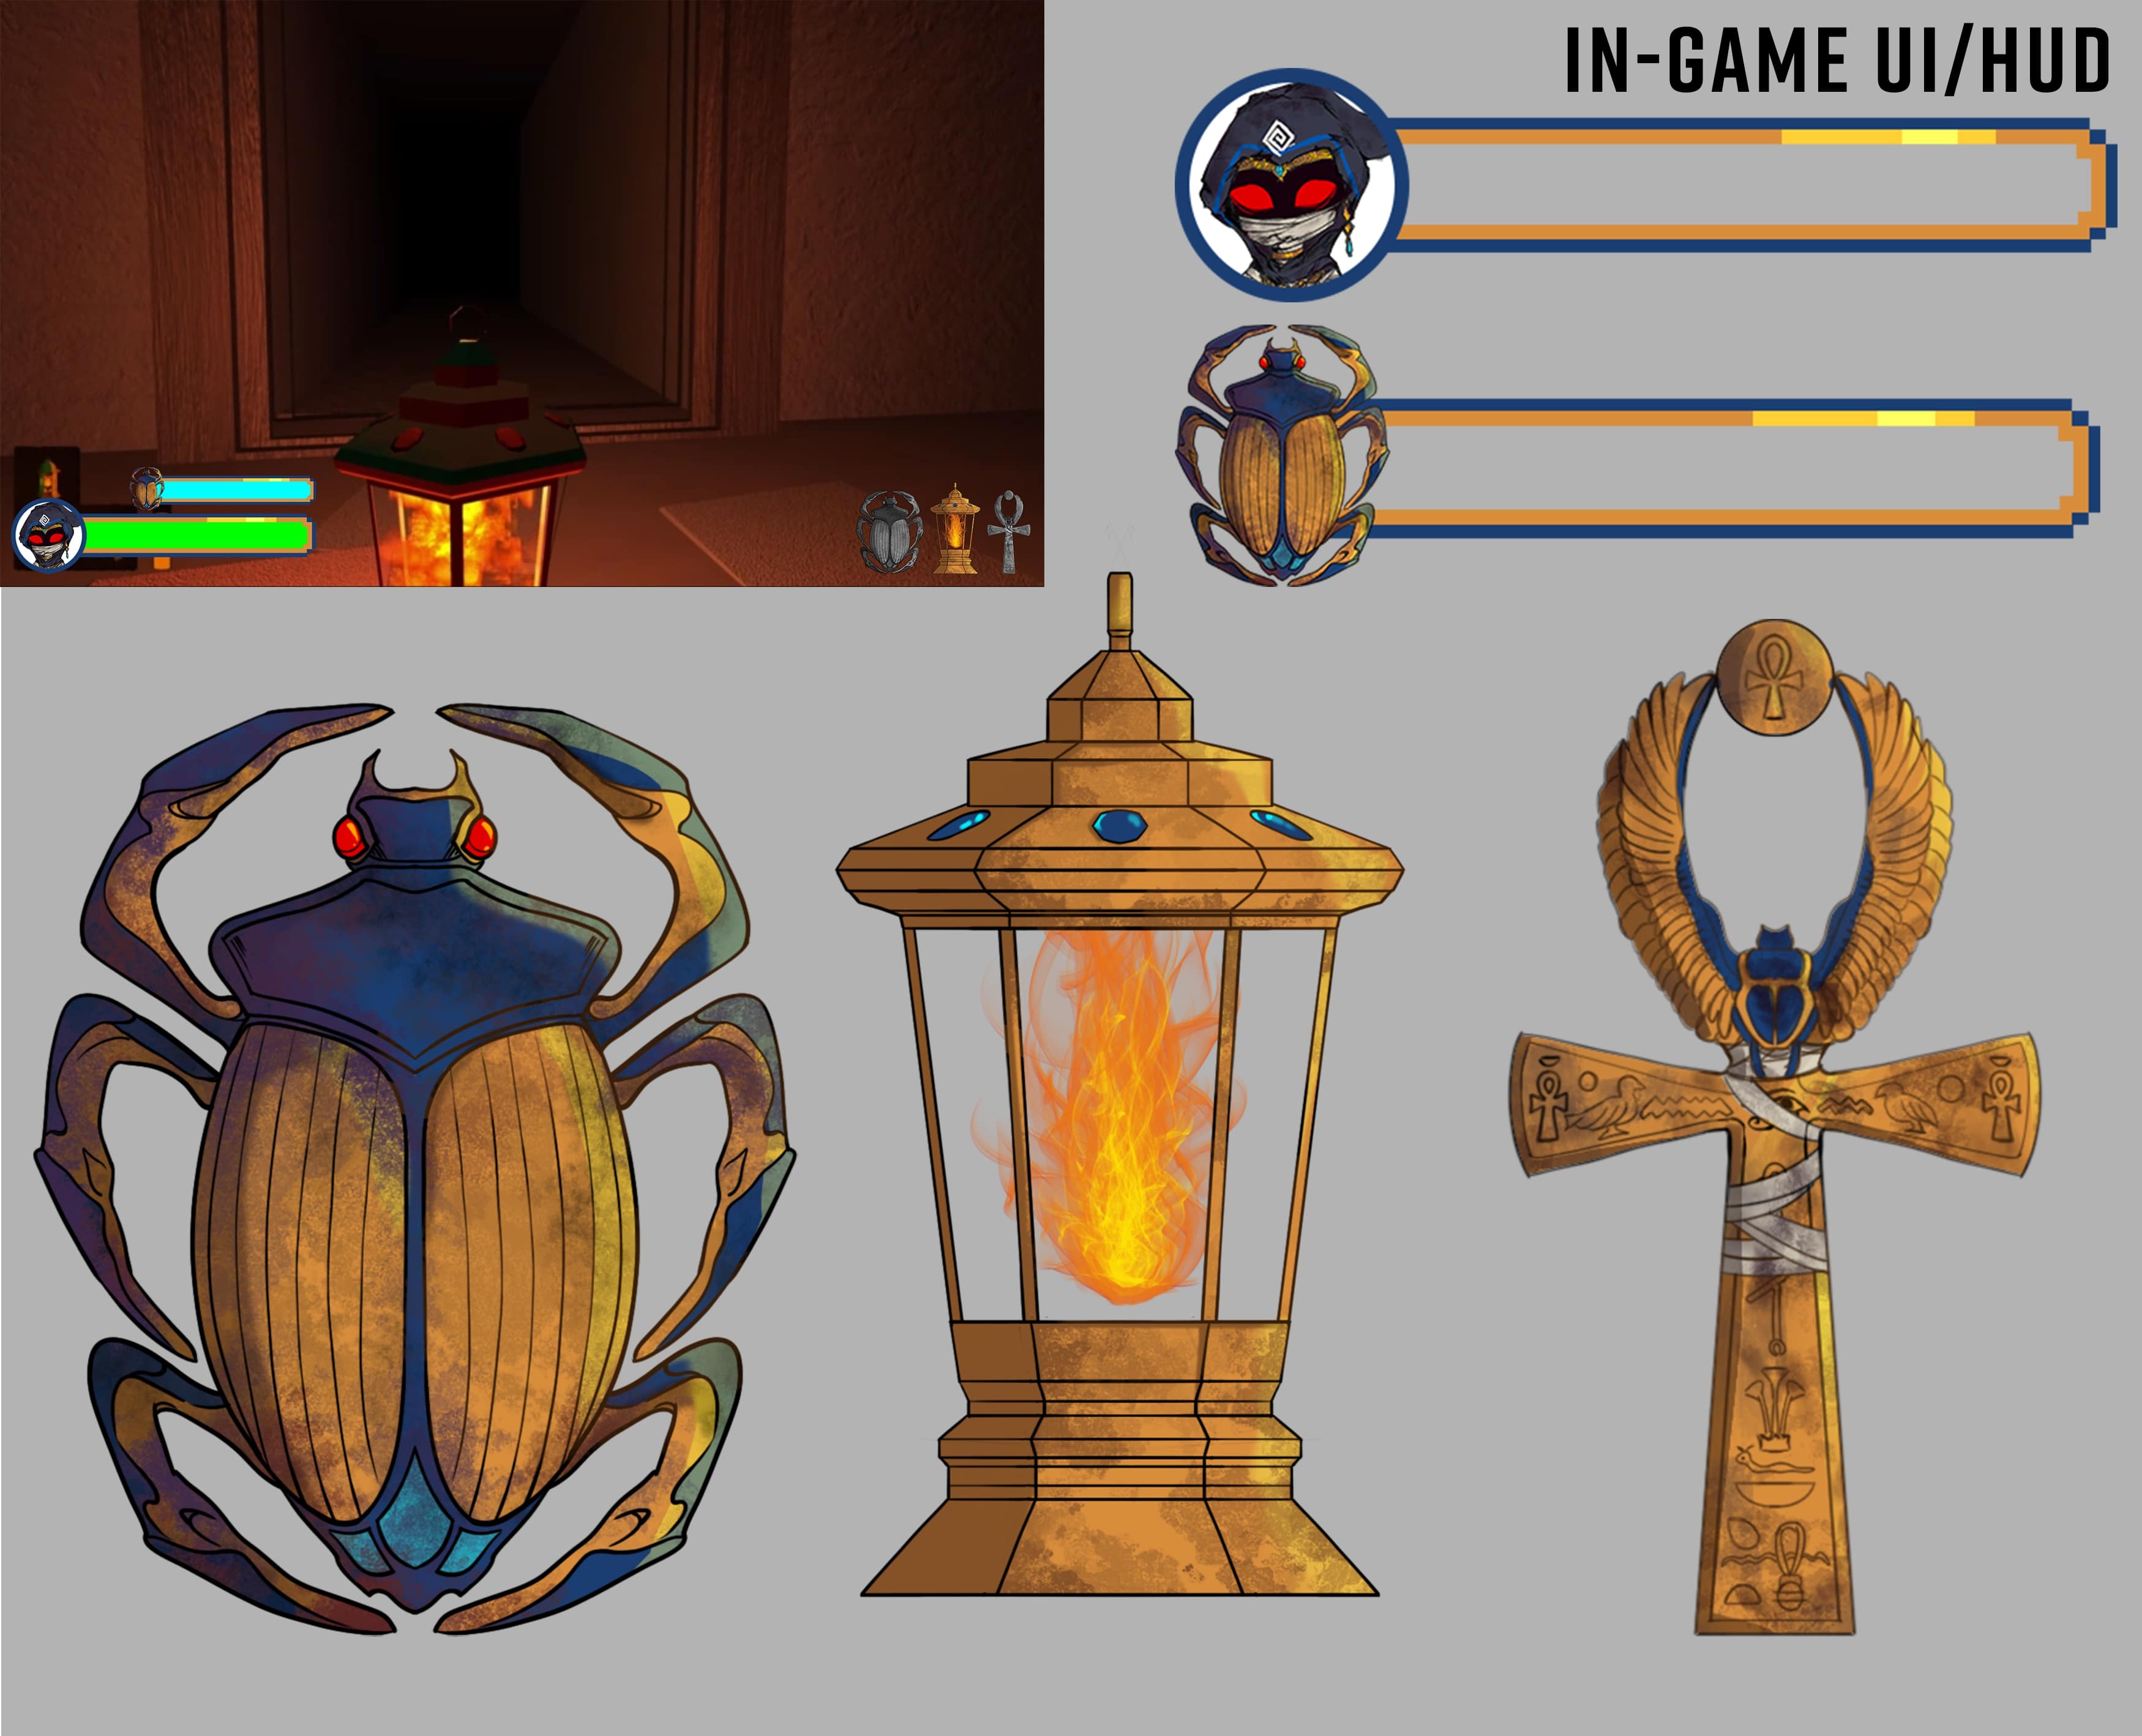 HUD images for UI(HP and mana bars, Scarab, Lantern, and Ankh)